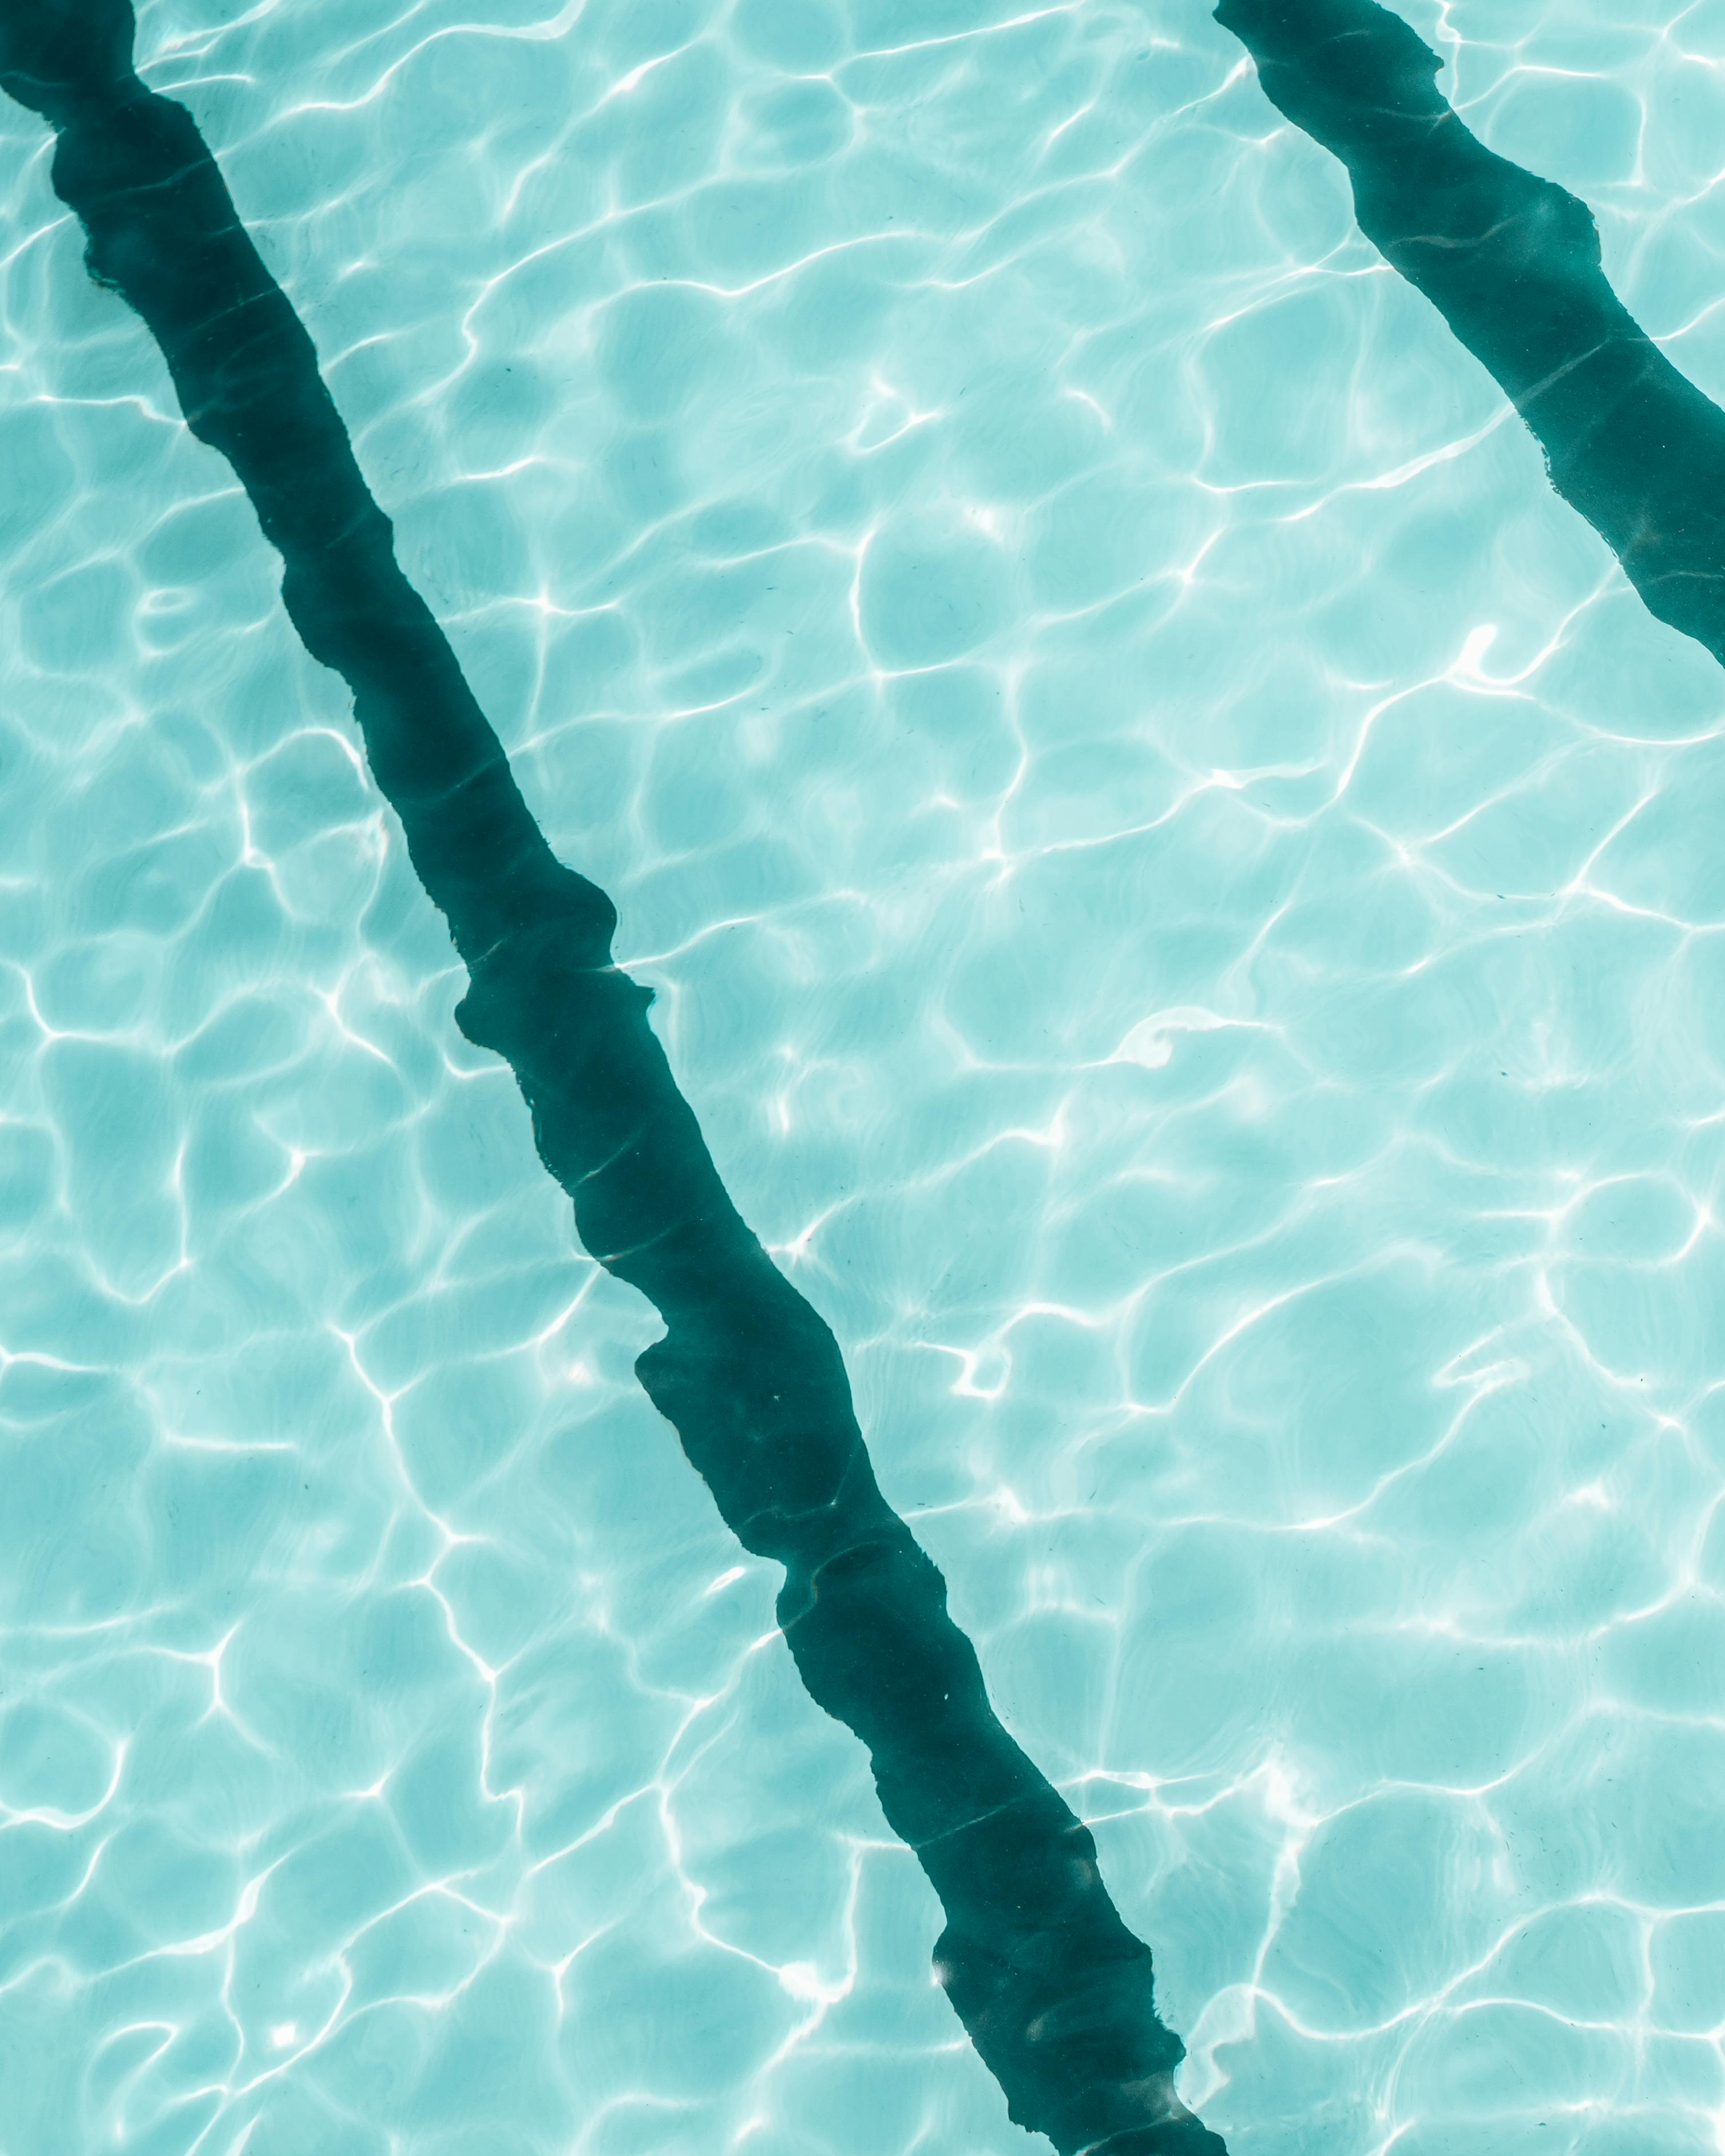 300+] Swimming Pool Background s | Wallpapers.com